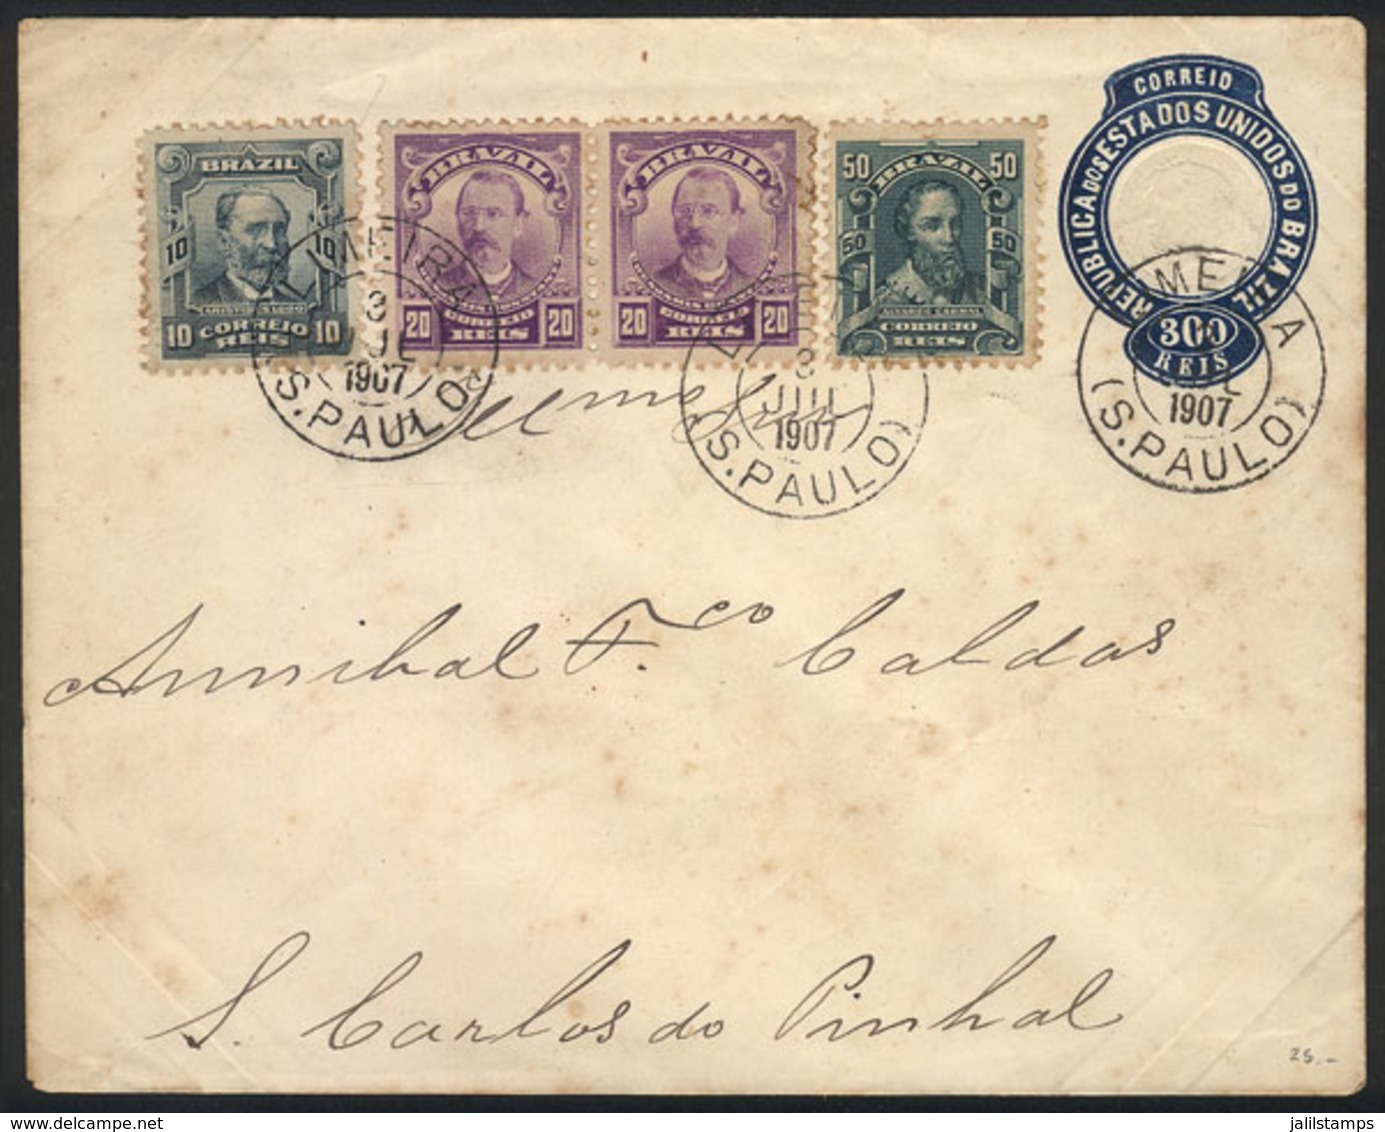 BRAZIL: 300Rs. Stationery Envelope + 100Rs. Sent To S.Carlos Do Pinhal On 3/JUL/1907, Cancelled In LIMEIRA (S.Paulo), VF - Préphilatélie